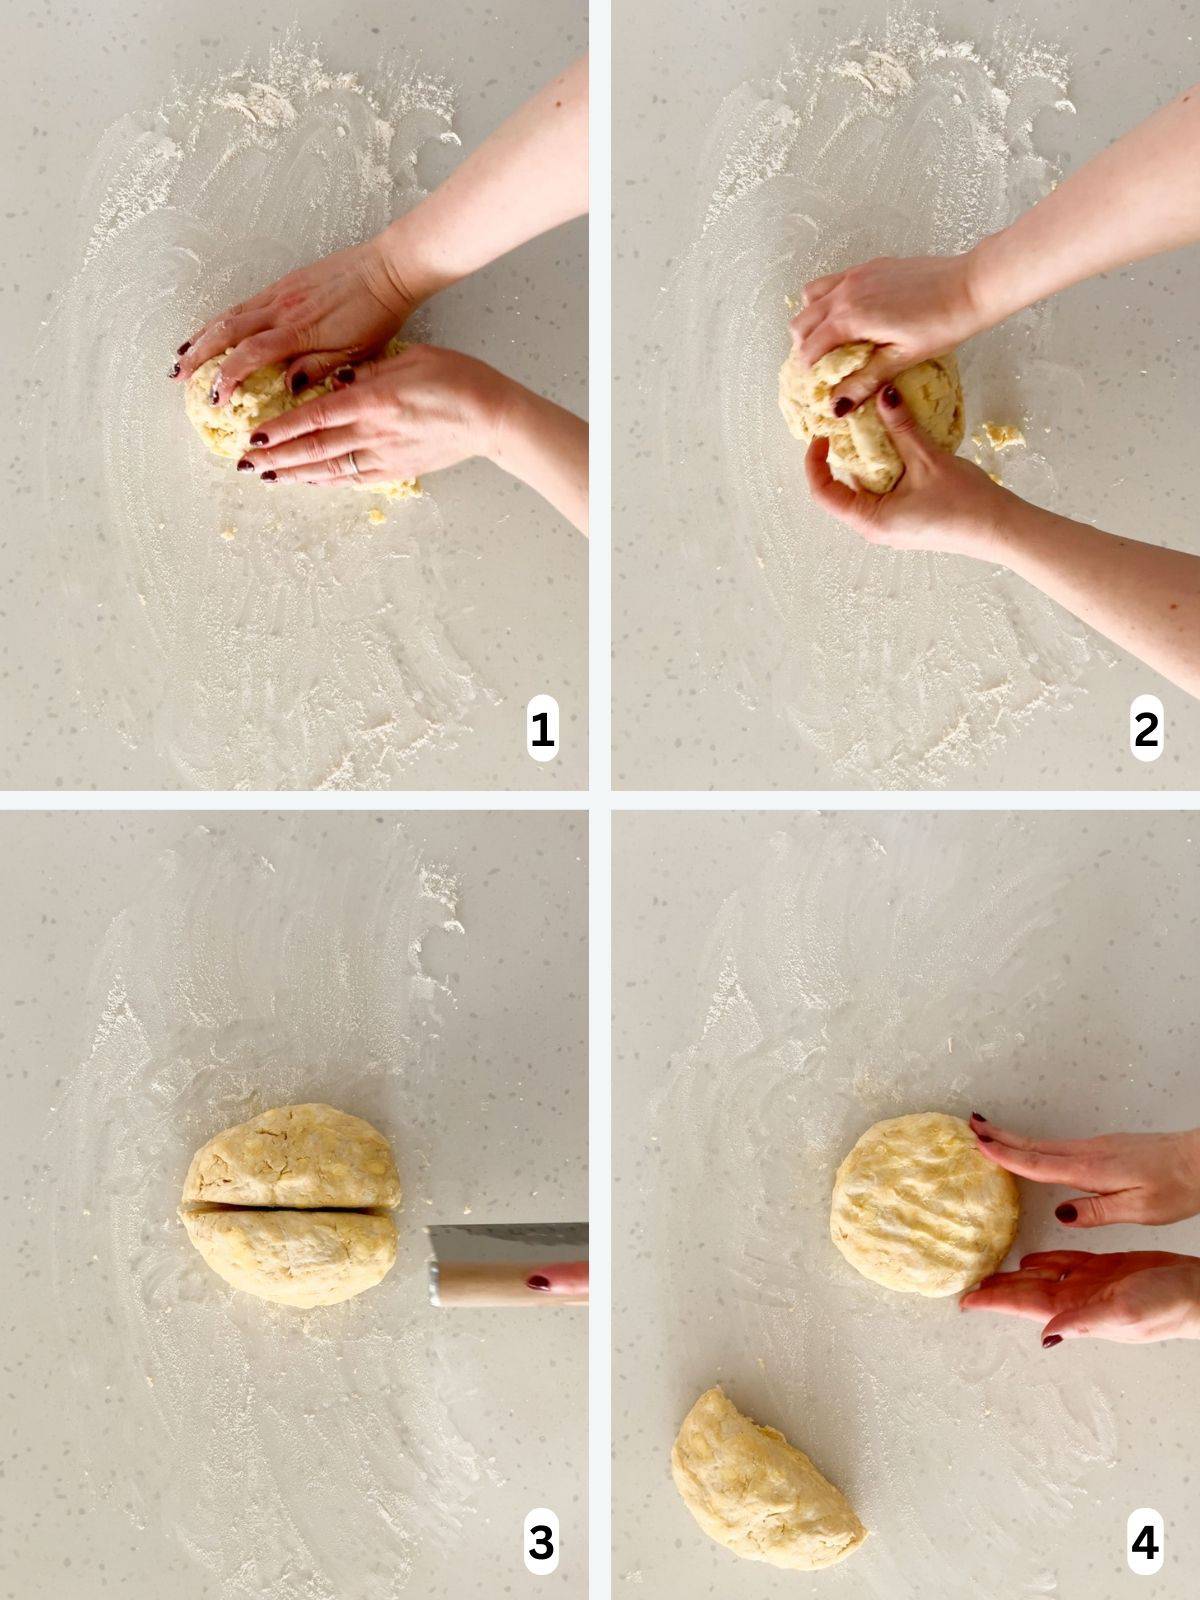 Pie dough is shaped into a ball and then formed into two disks 1 inch thick.